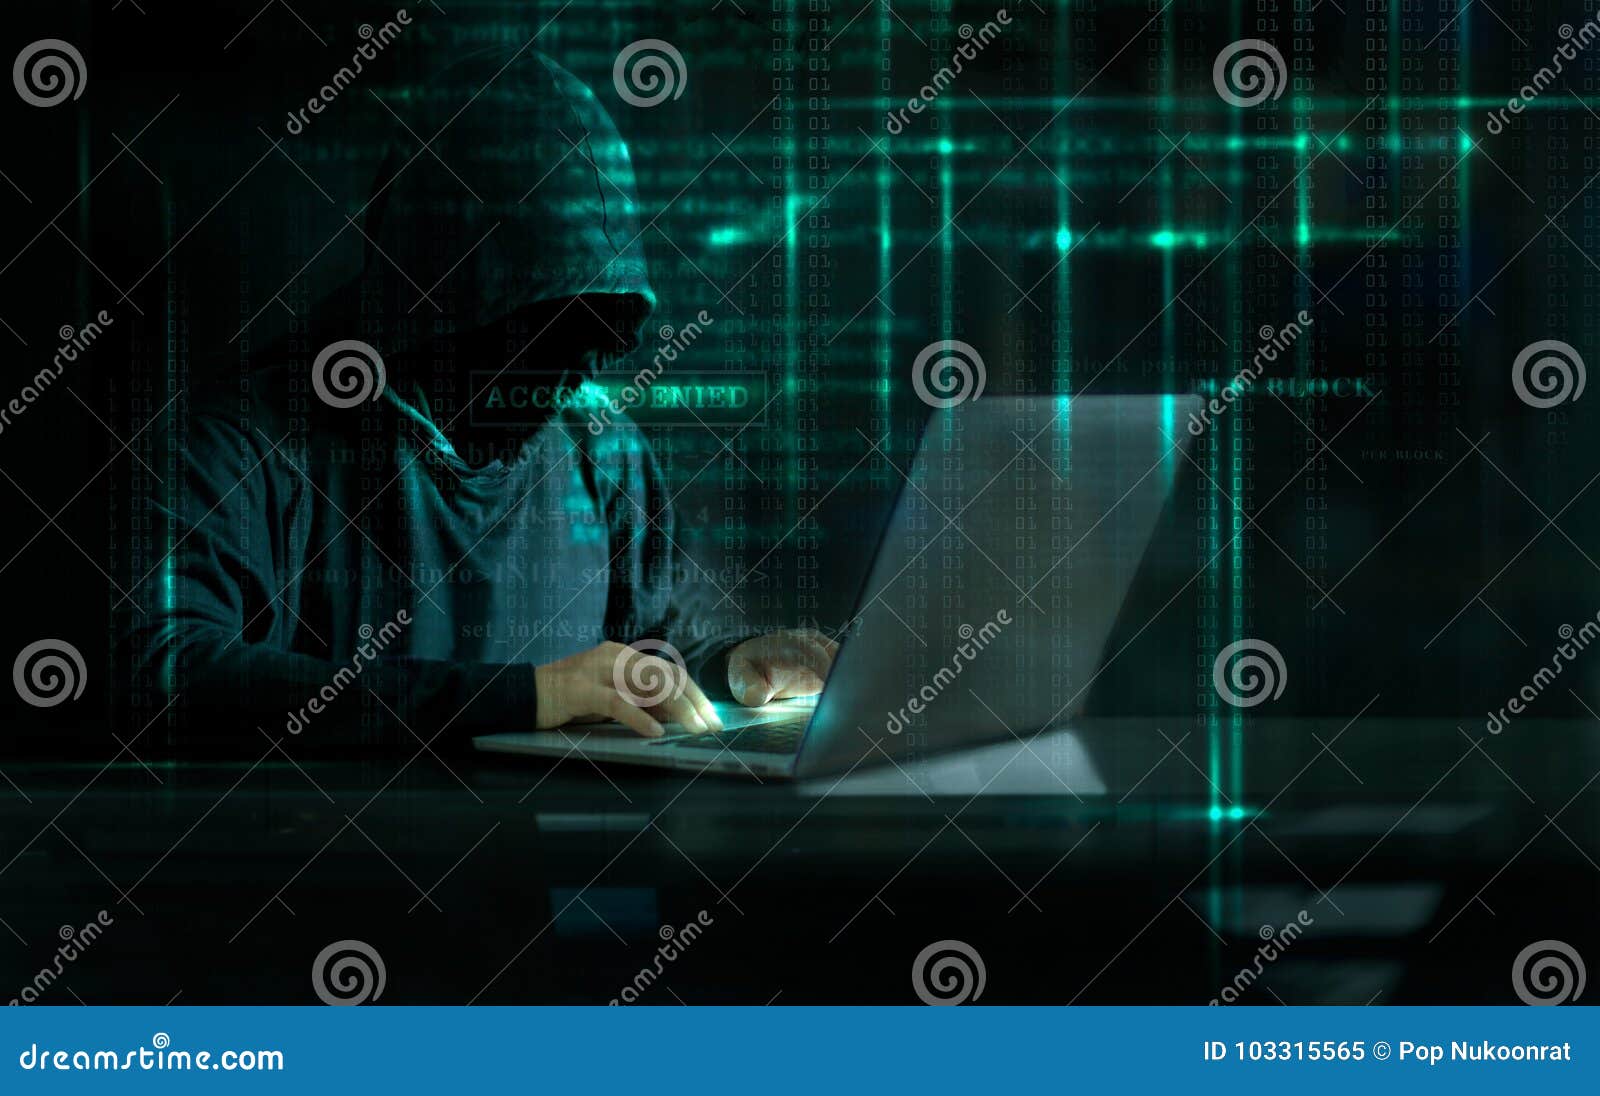 cyber attack hacker using computer with code on interface digital dark background. security system and internet crime concept.